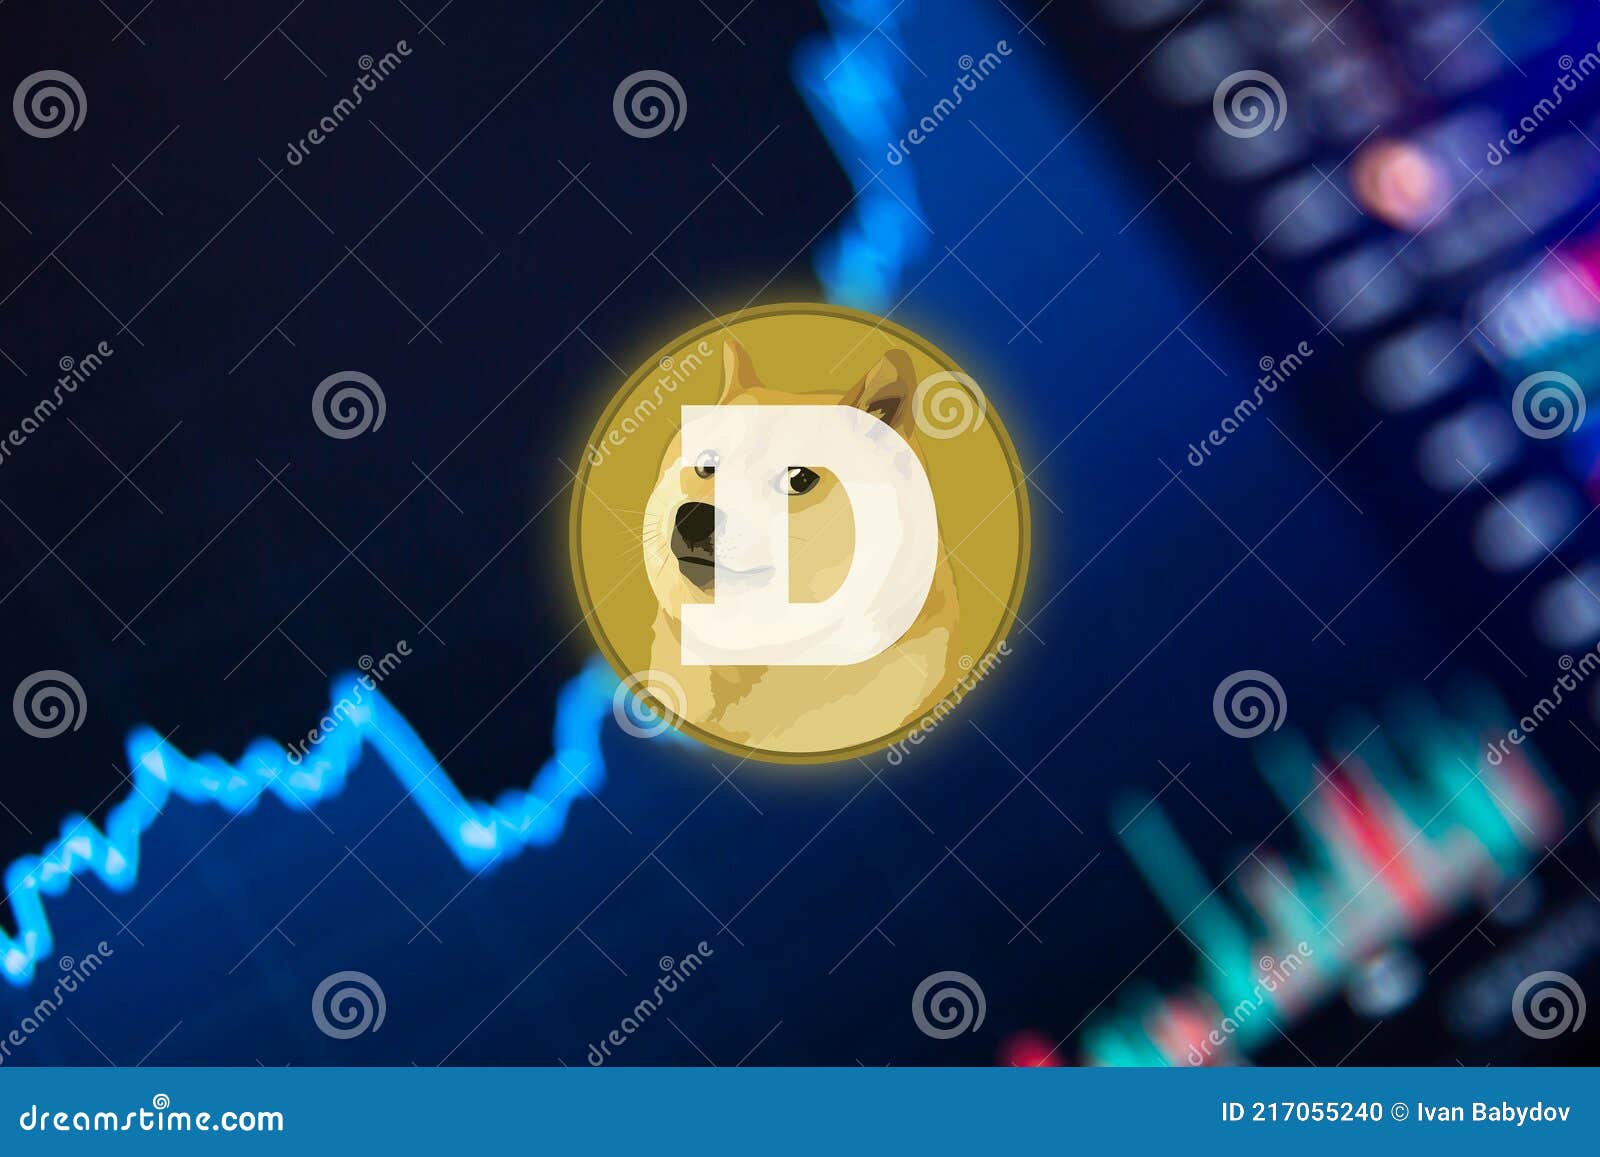 dogecoin cryptocurrency value